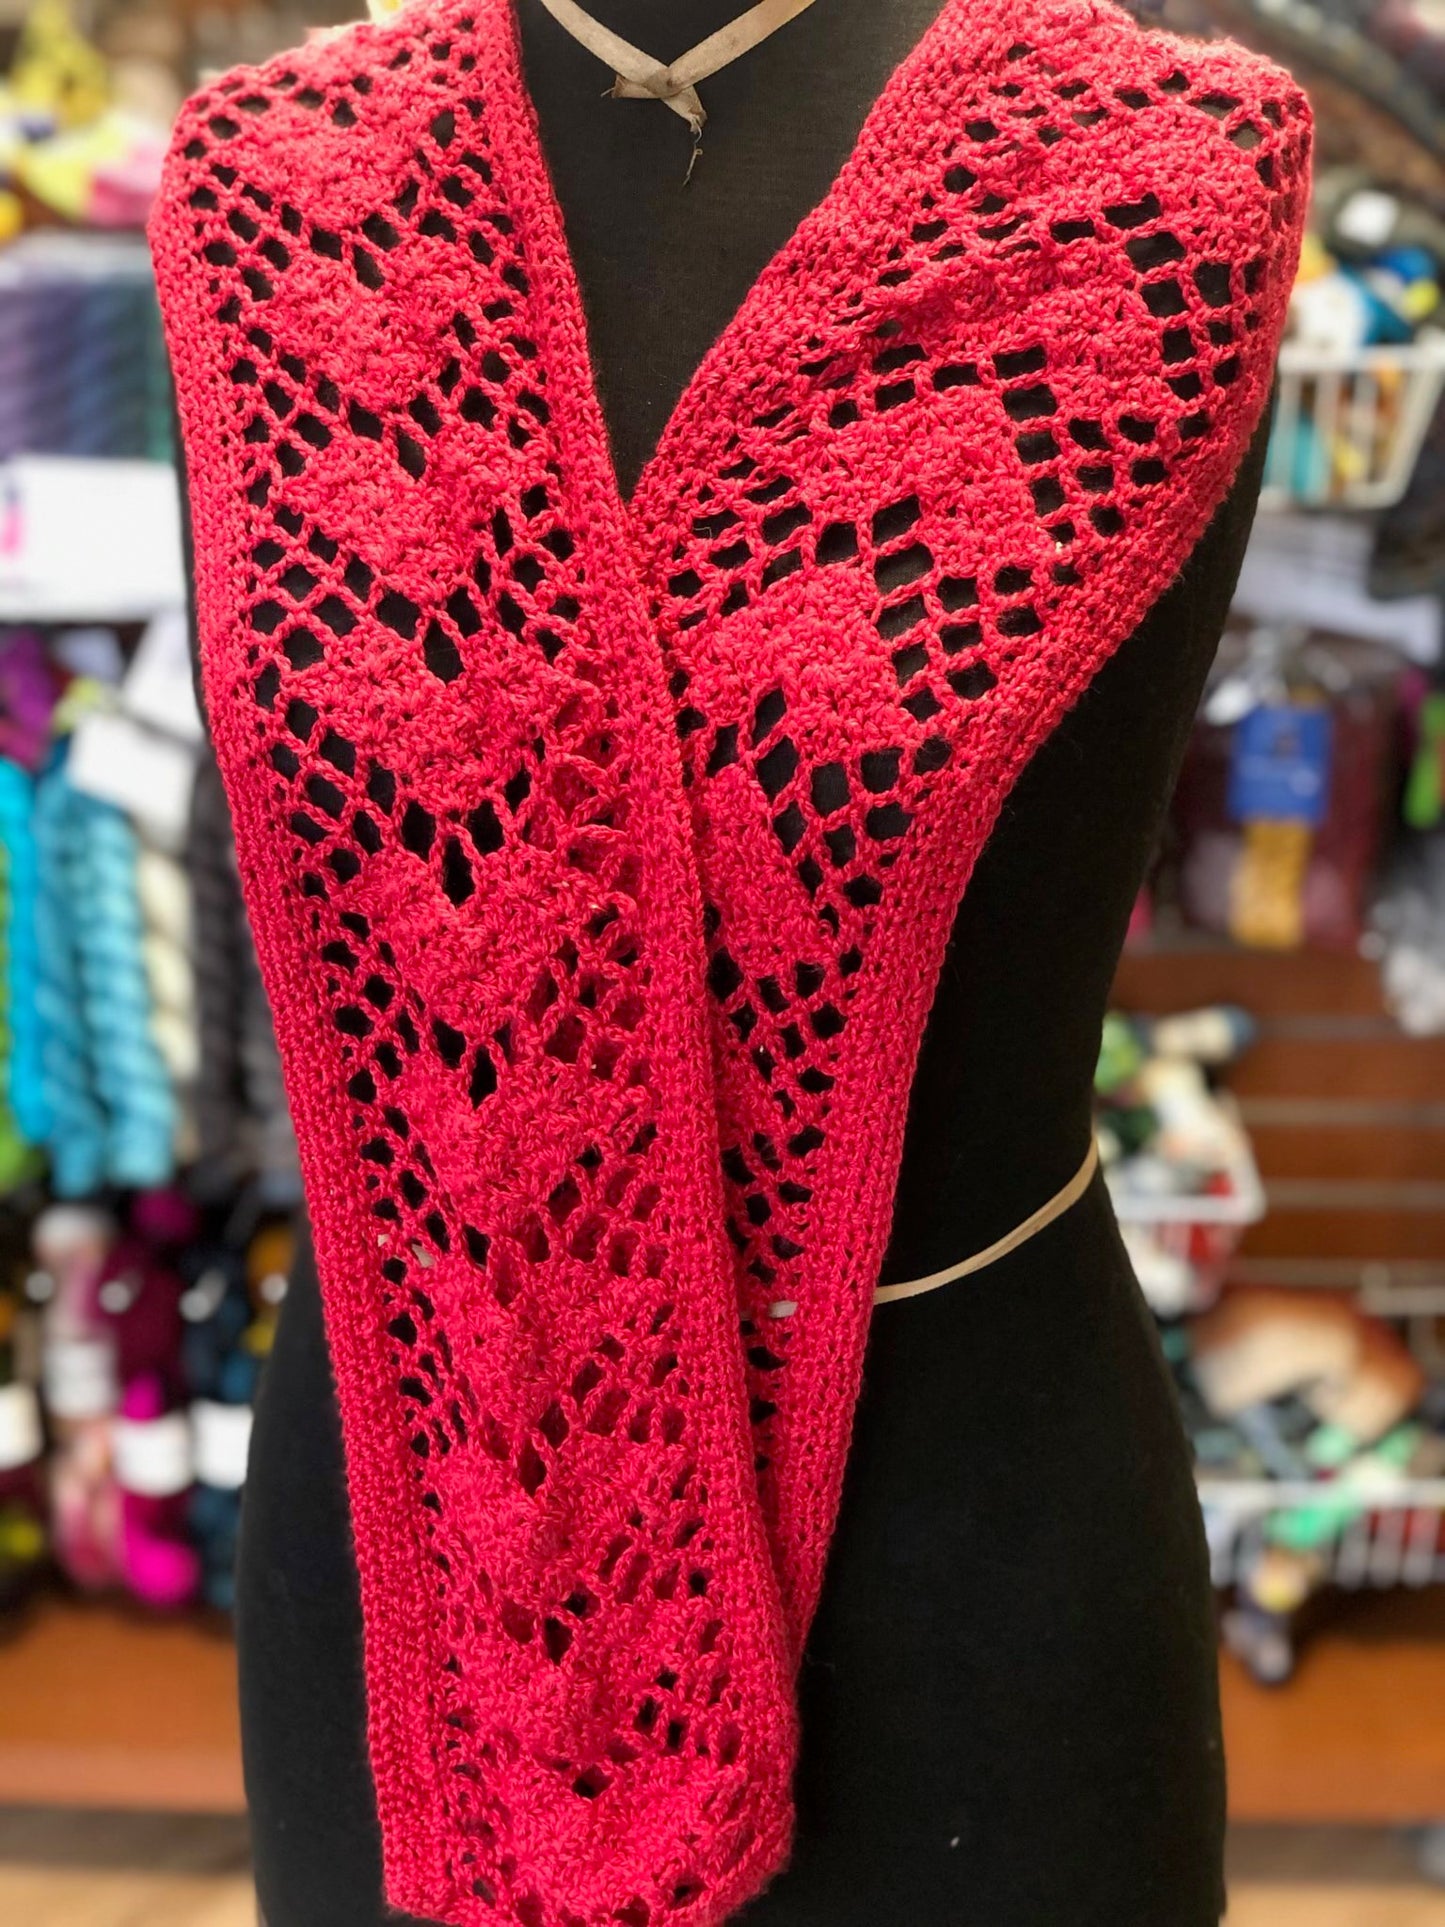 Heart Scarf (crochet) with Chris A., 1/14 10 a.m. - noon